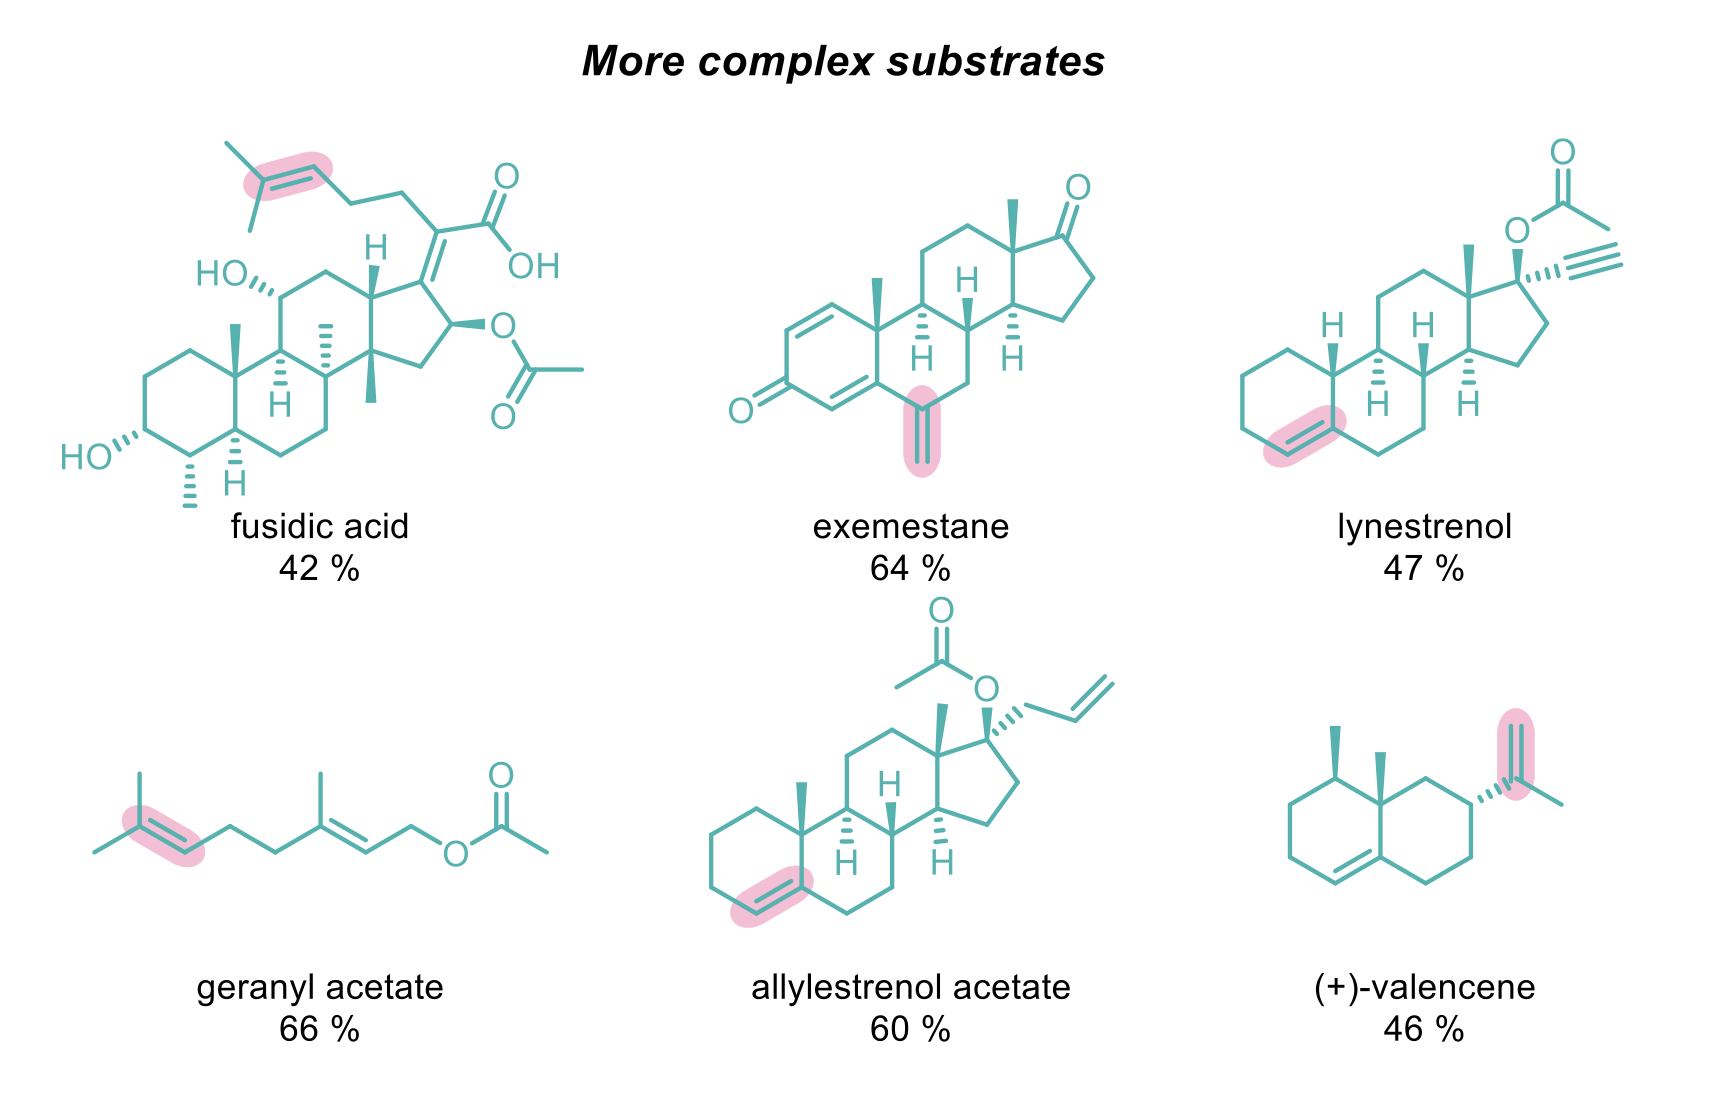 More complex substrates